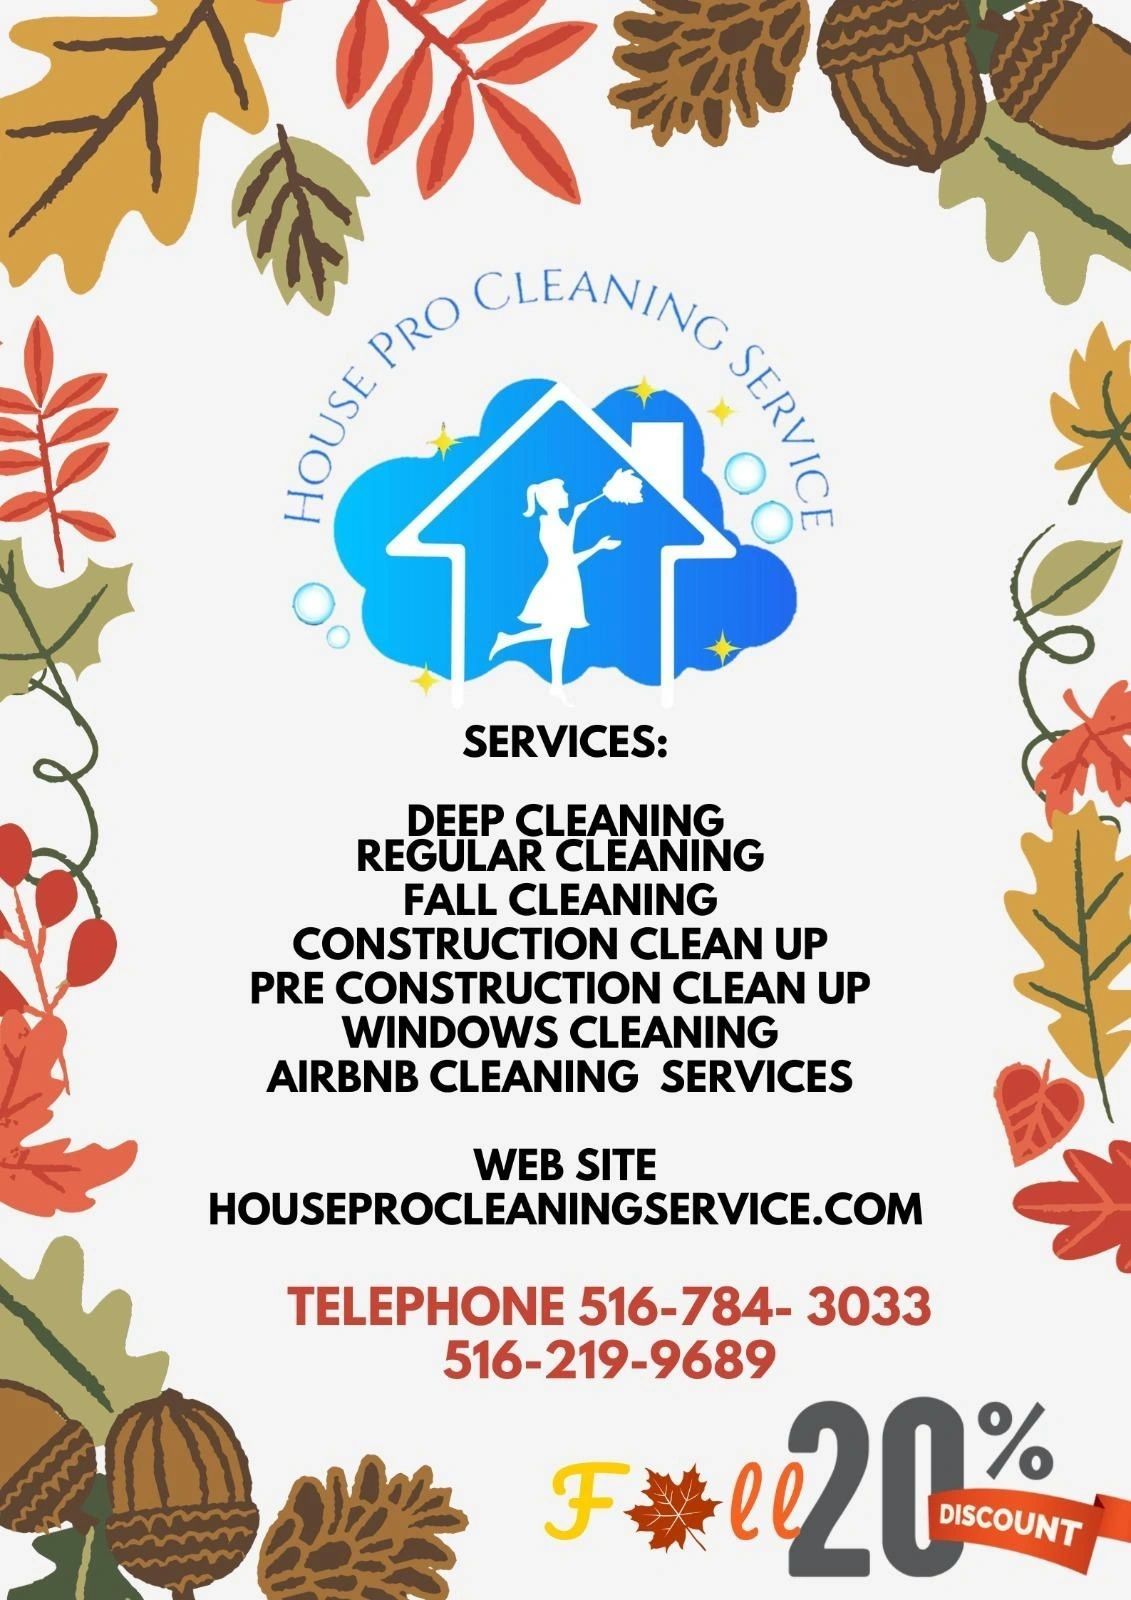 a house pro cleaning service advertisement with a 20 % discount